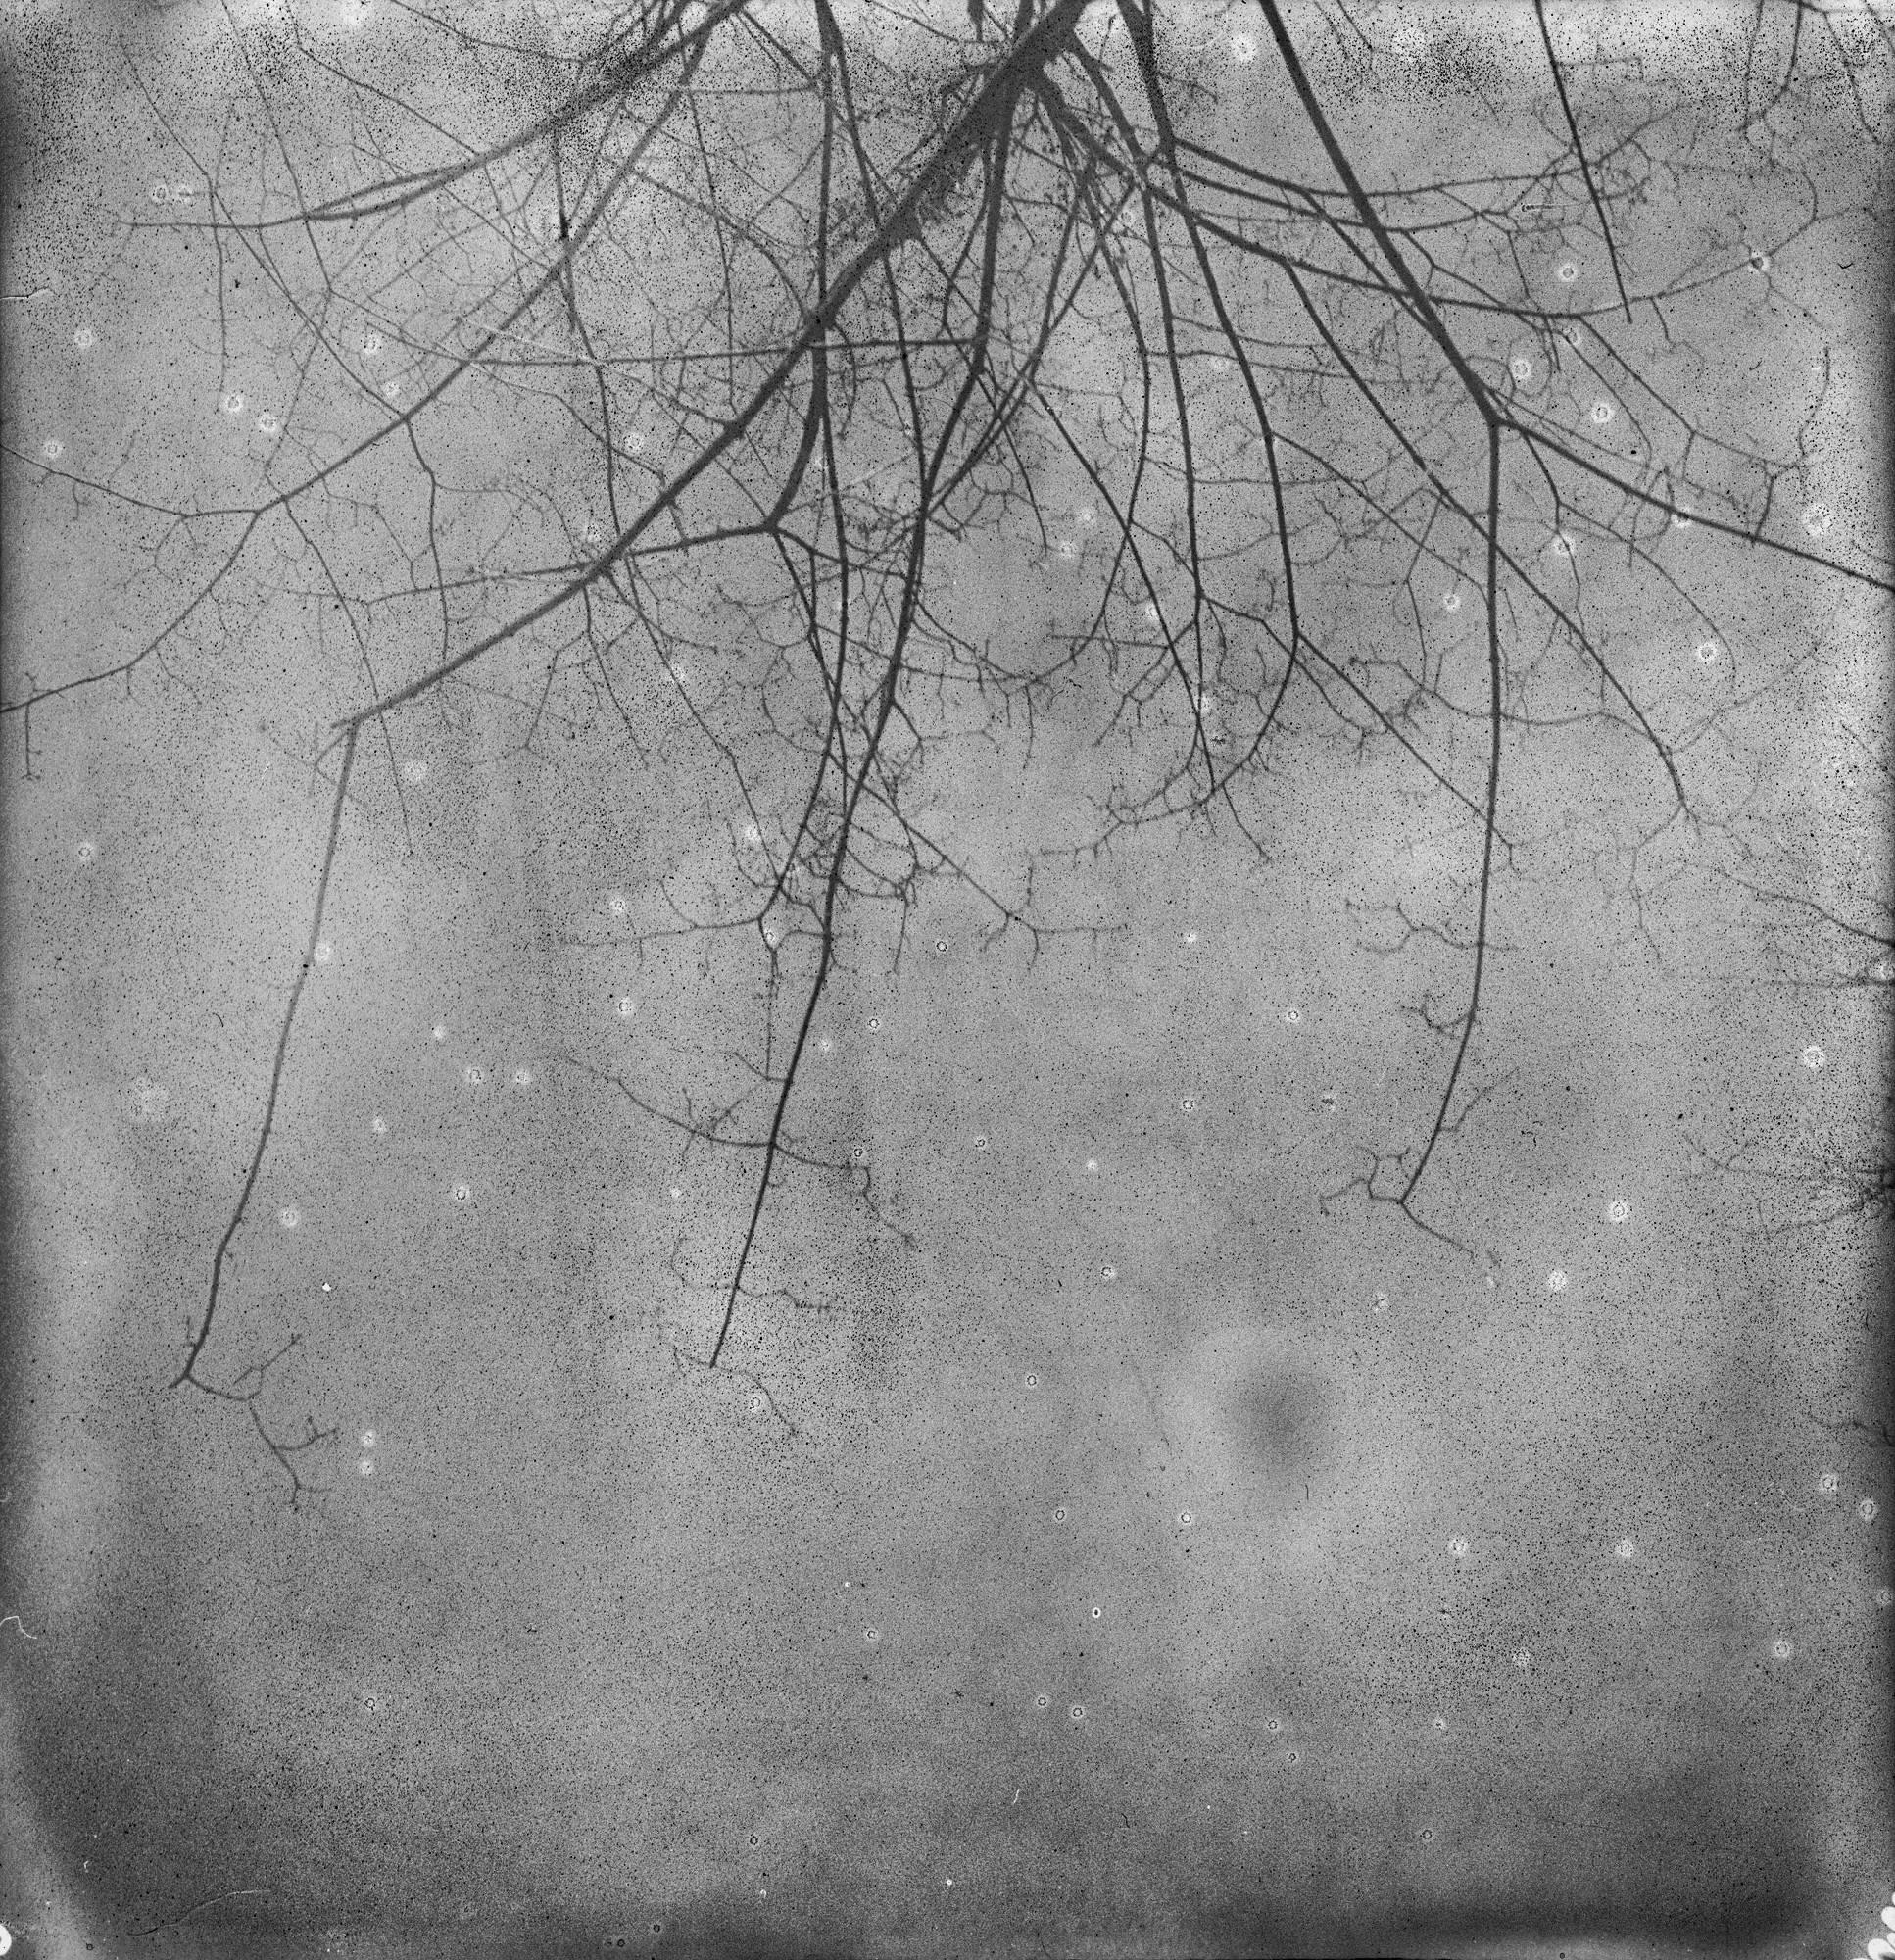 'And also the Trees’ - 2017 - 

21 x 20 cm, Edition 4/10, 
digital C-Print based on a reclaimed Polaroid negative. 
Numbered and signed on the back by the artist. 
Not mounted. 

Artist Statement
“Since my childhood days I always loved taking